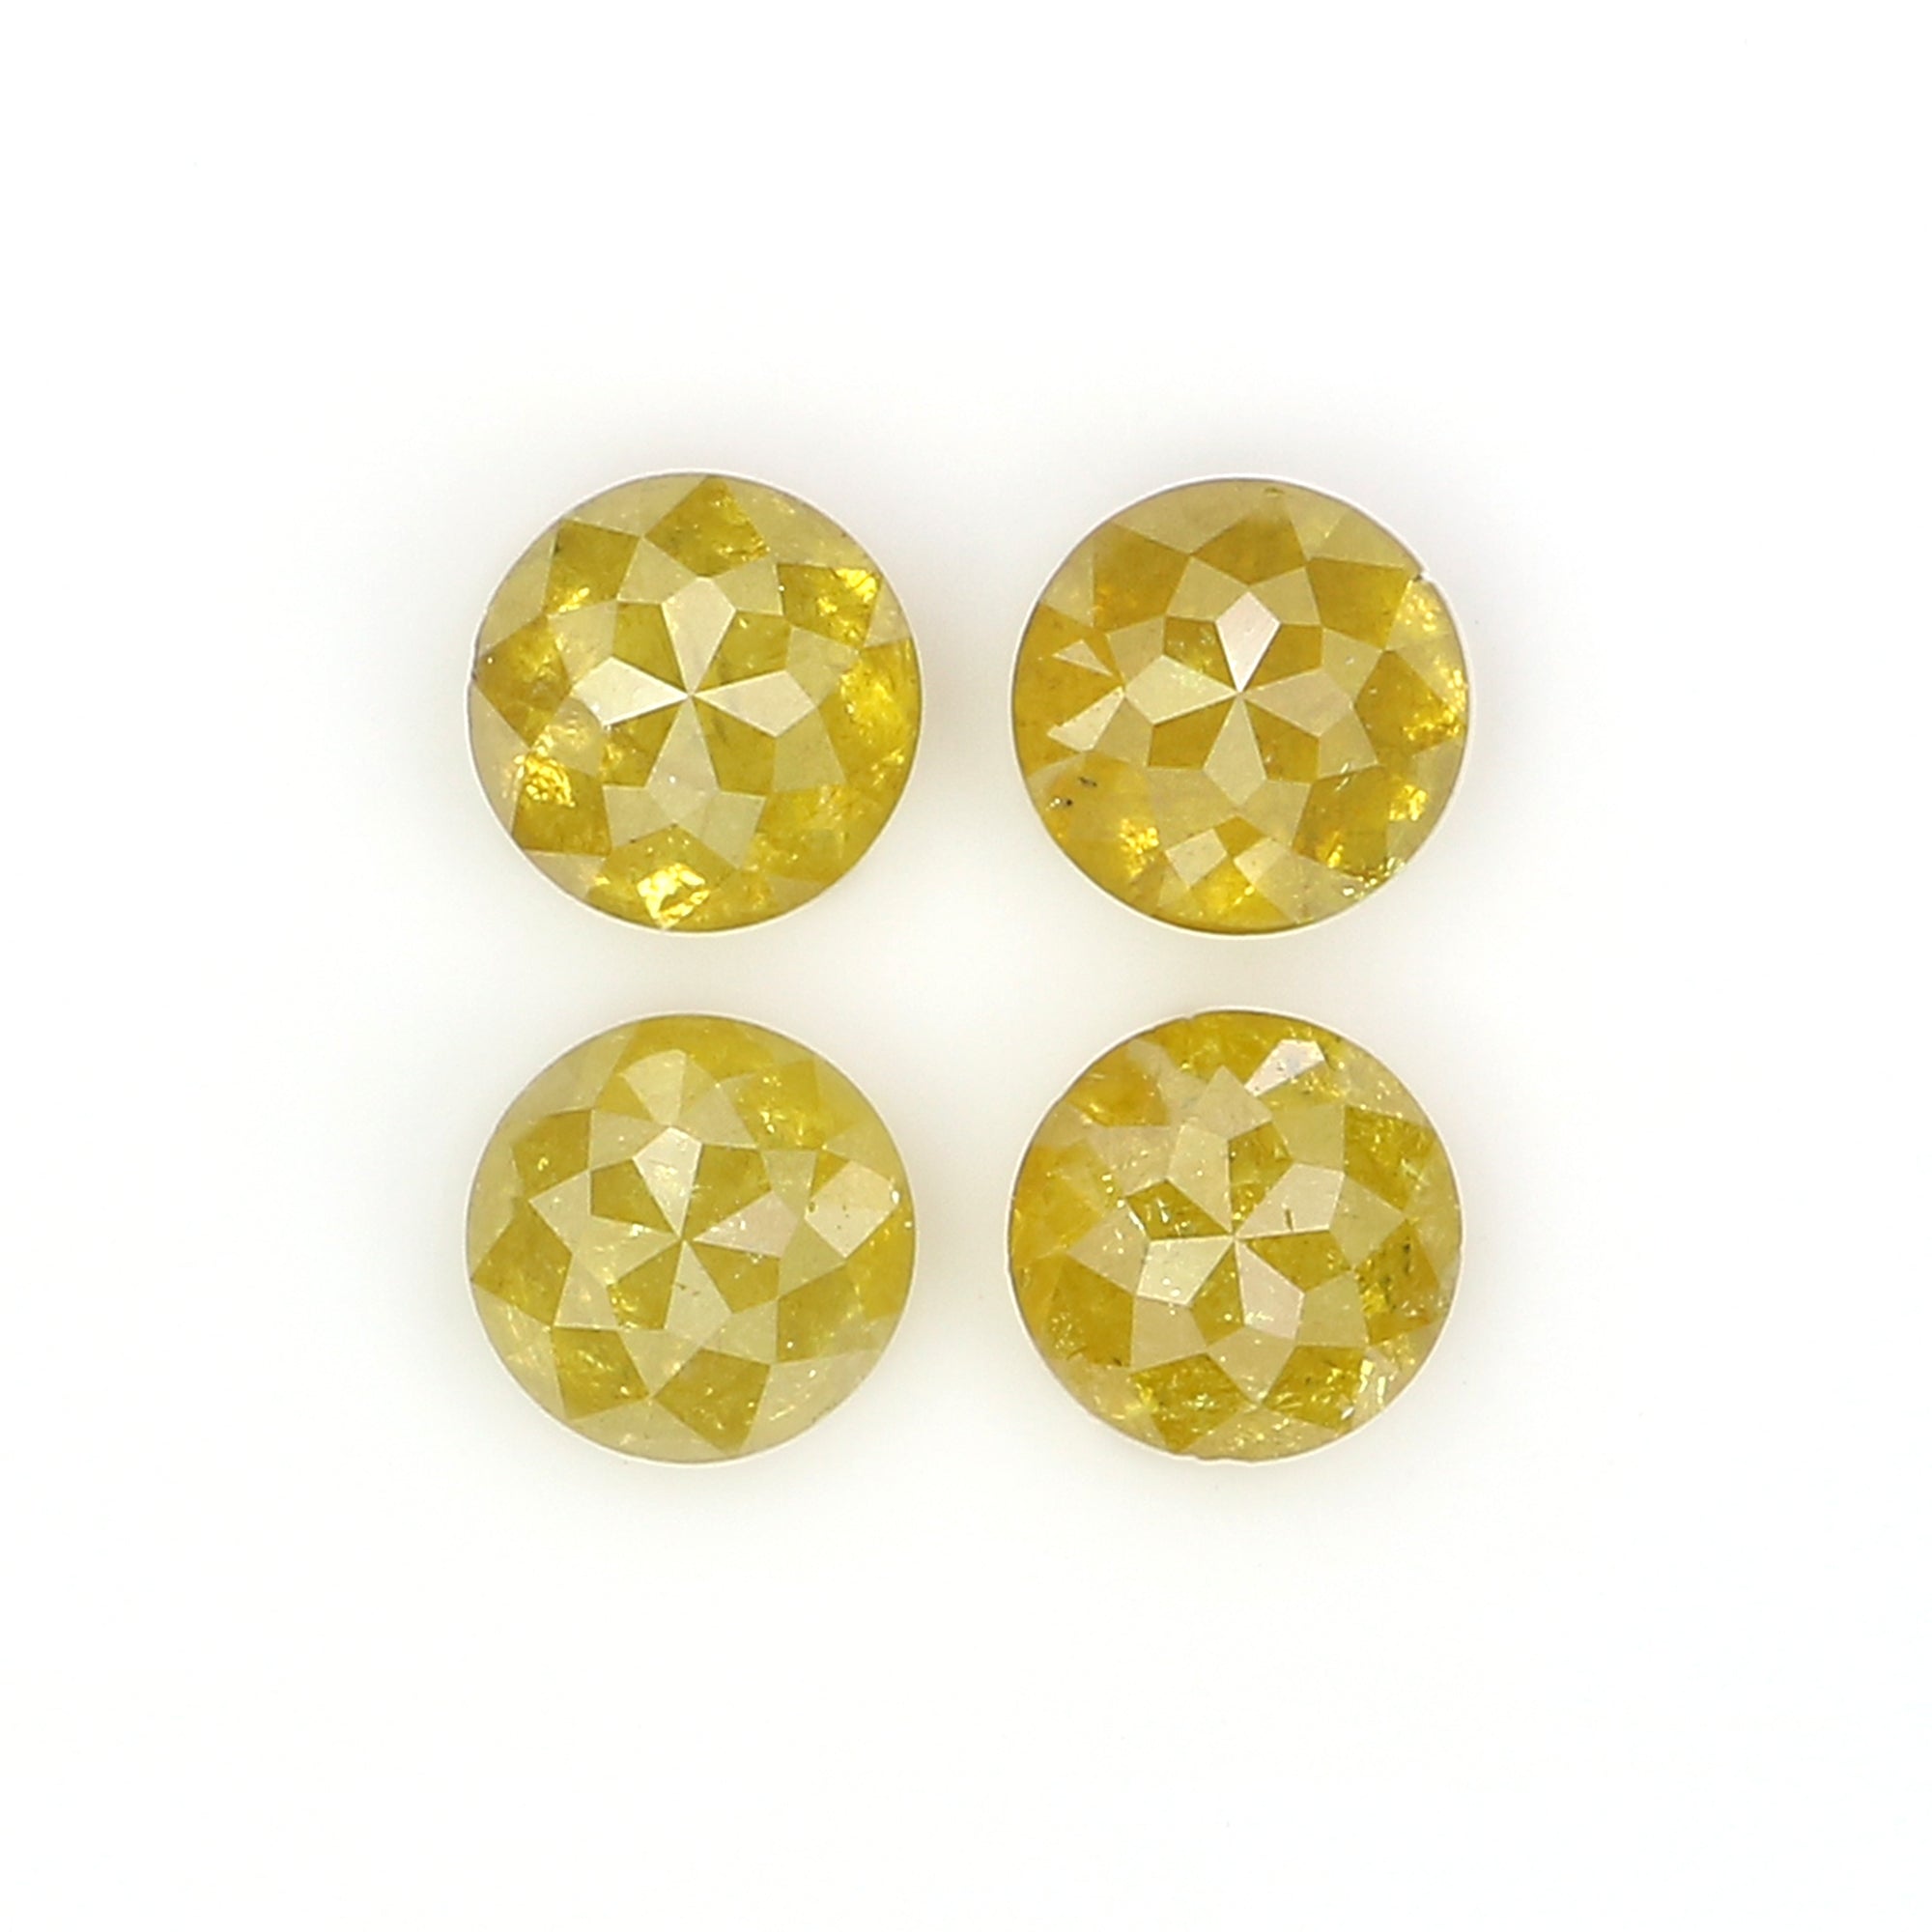 Natural Loose Round Diamond, Yellow Color Rose Cut Diamond, Natural Loose Diamond, Round Rose Cut Diamond, 1.47 CT Round Shape Diamond L2927